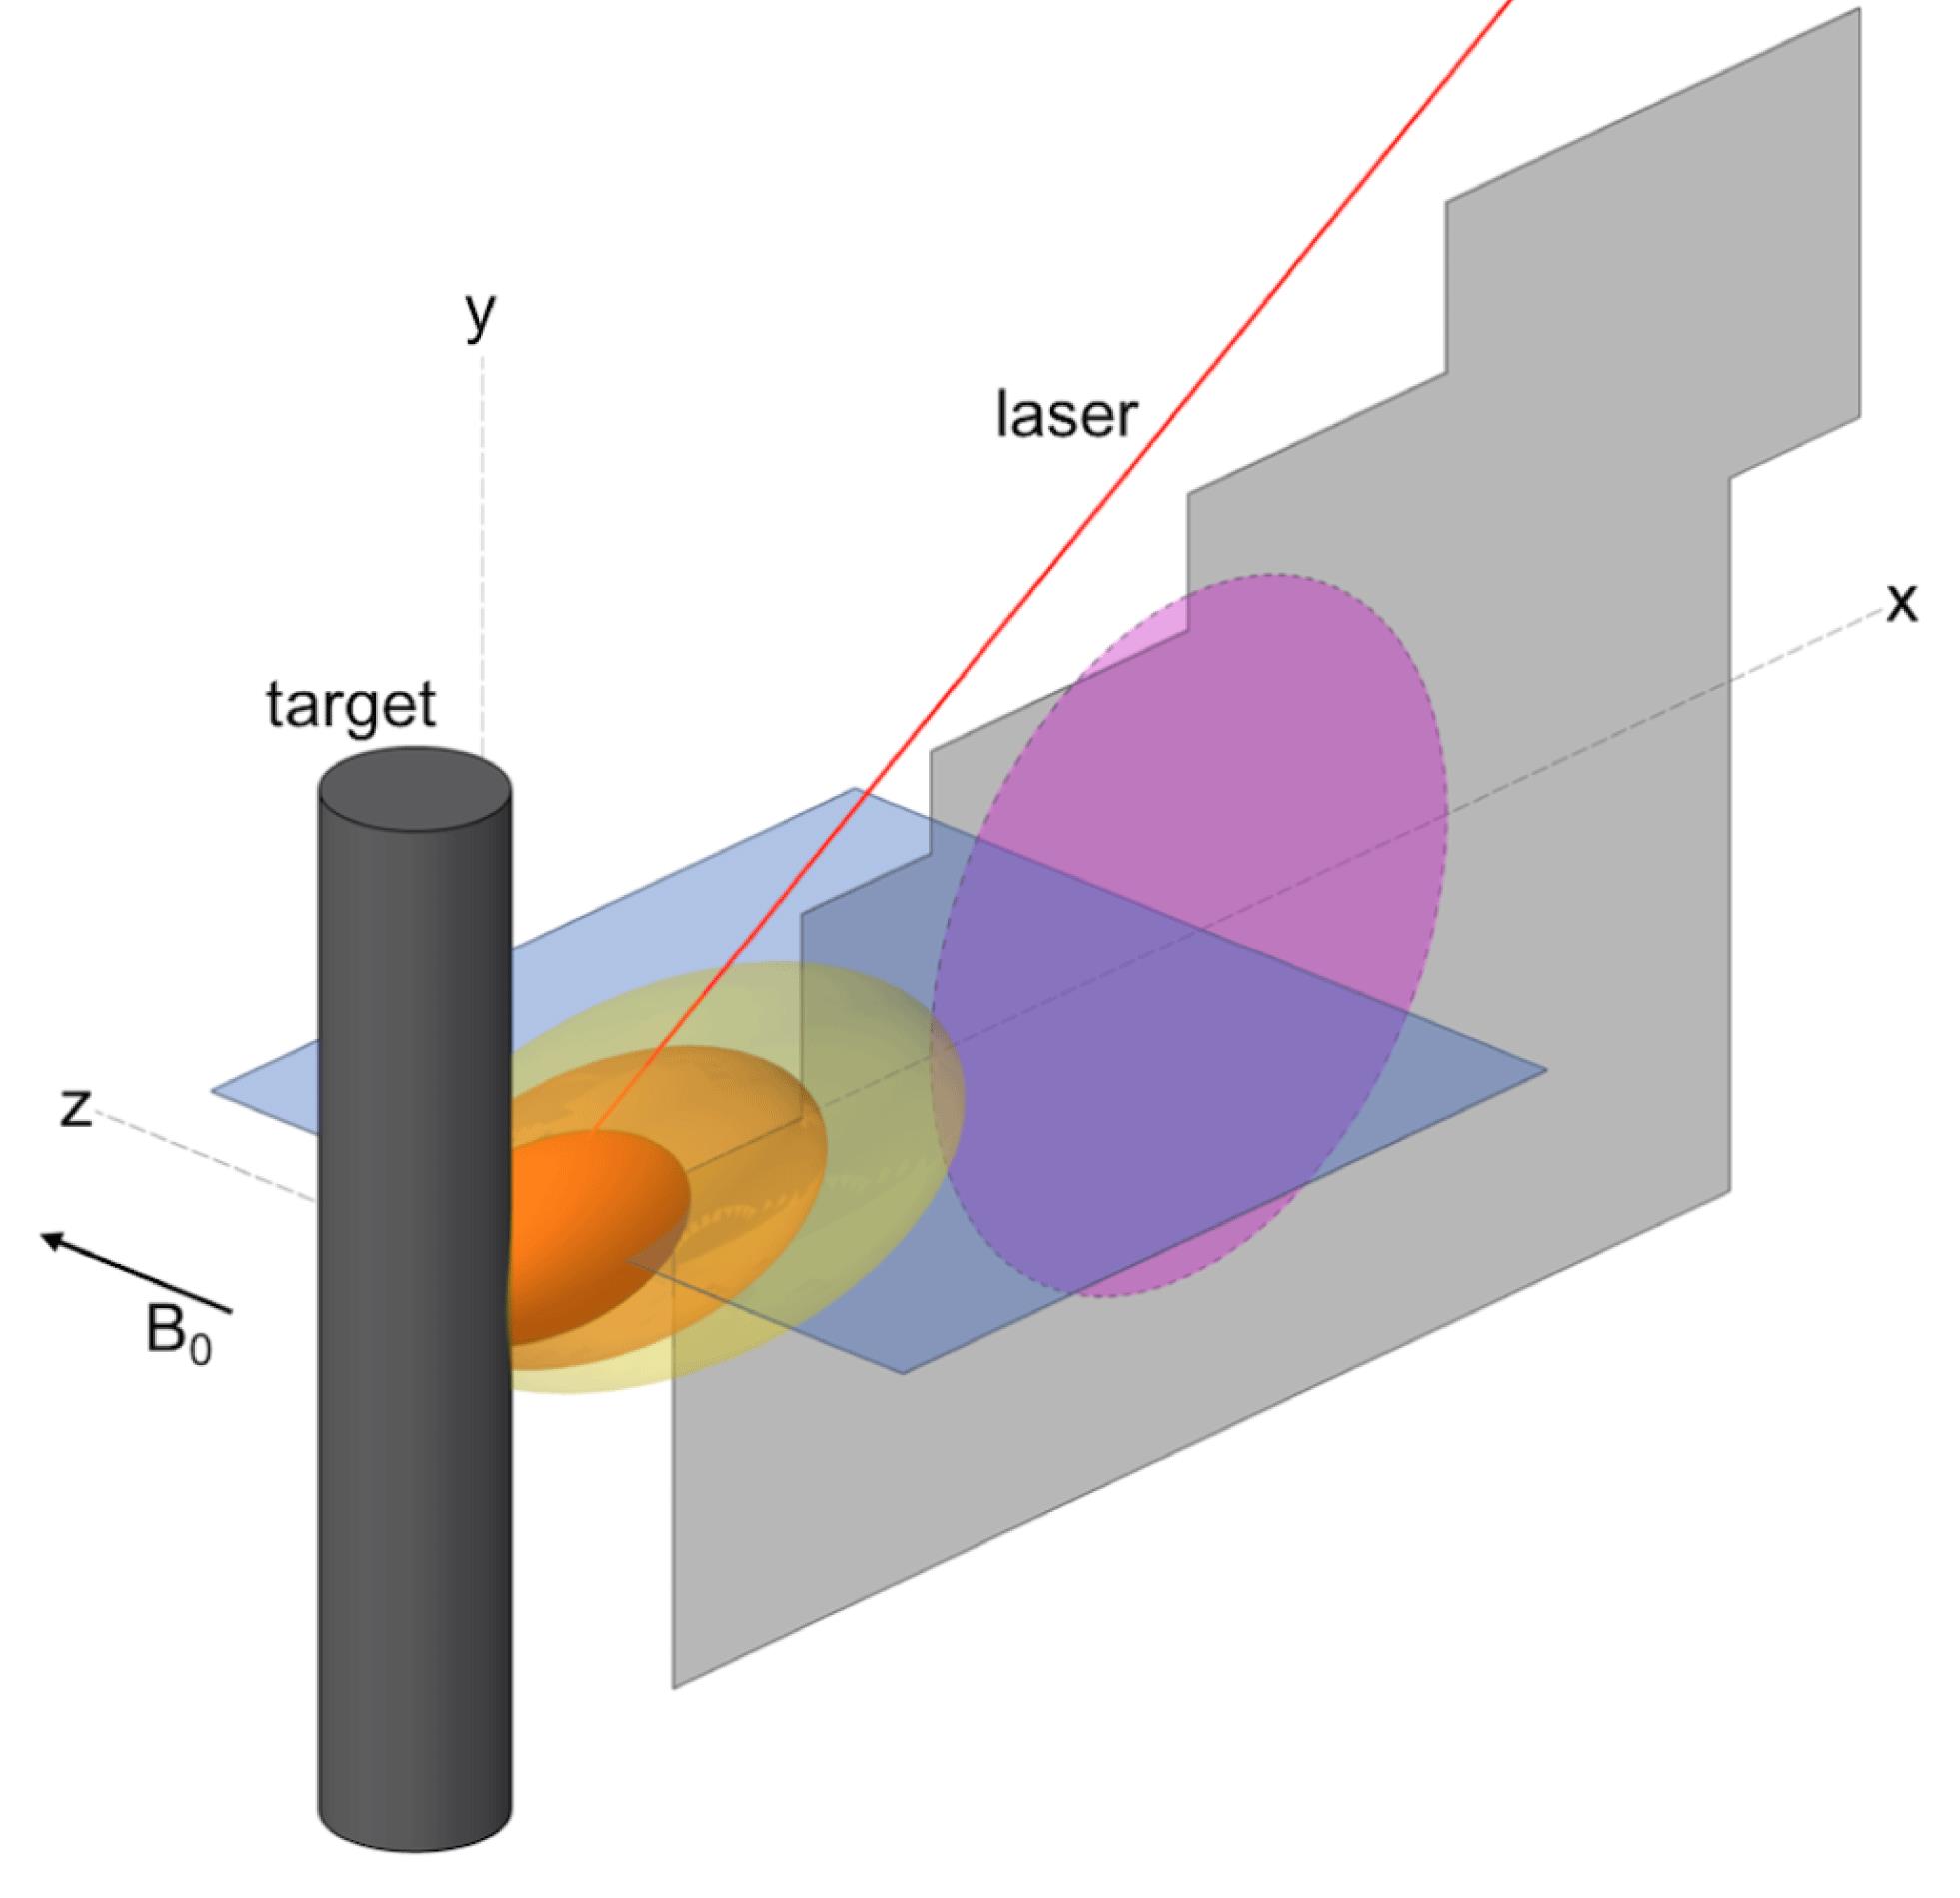 Schematic of the experimental setup in the LAPD. A high-repetition-rate laser hits a plastic target embedded in an ambient magnetized plasma. The target rotates and translates in between laser shots. The resulting interaction between the laser plasma and ambient plasma is scanned with magnetic flux (‘bdot’) probes and emissive Langmuir probes in two intersecting planes, – (blue) and – (gray). The location of the high-density ambient plasma at is shown in purple.